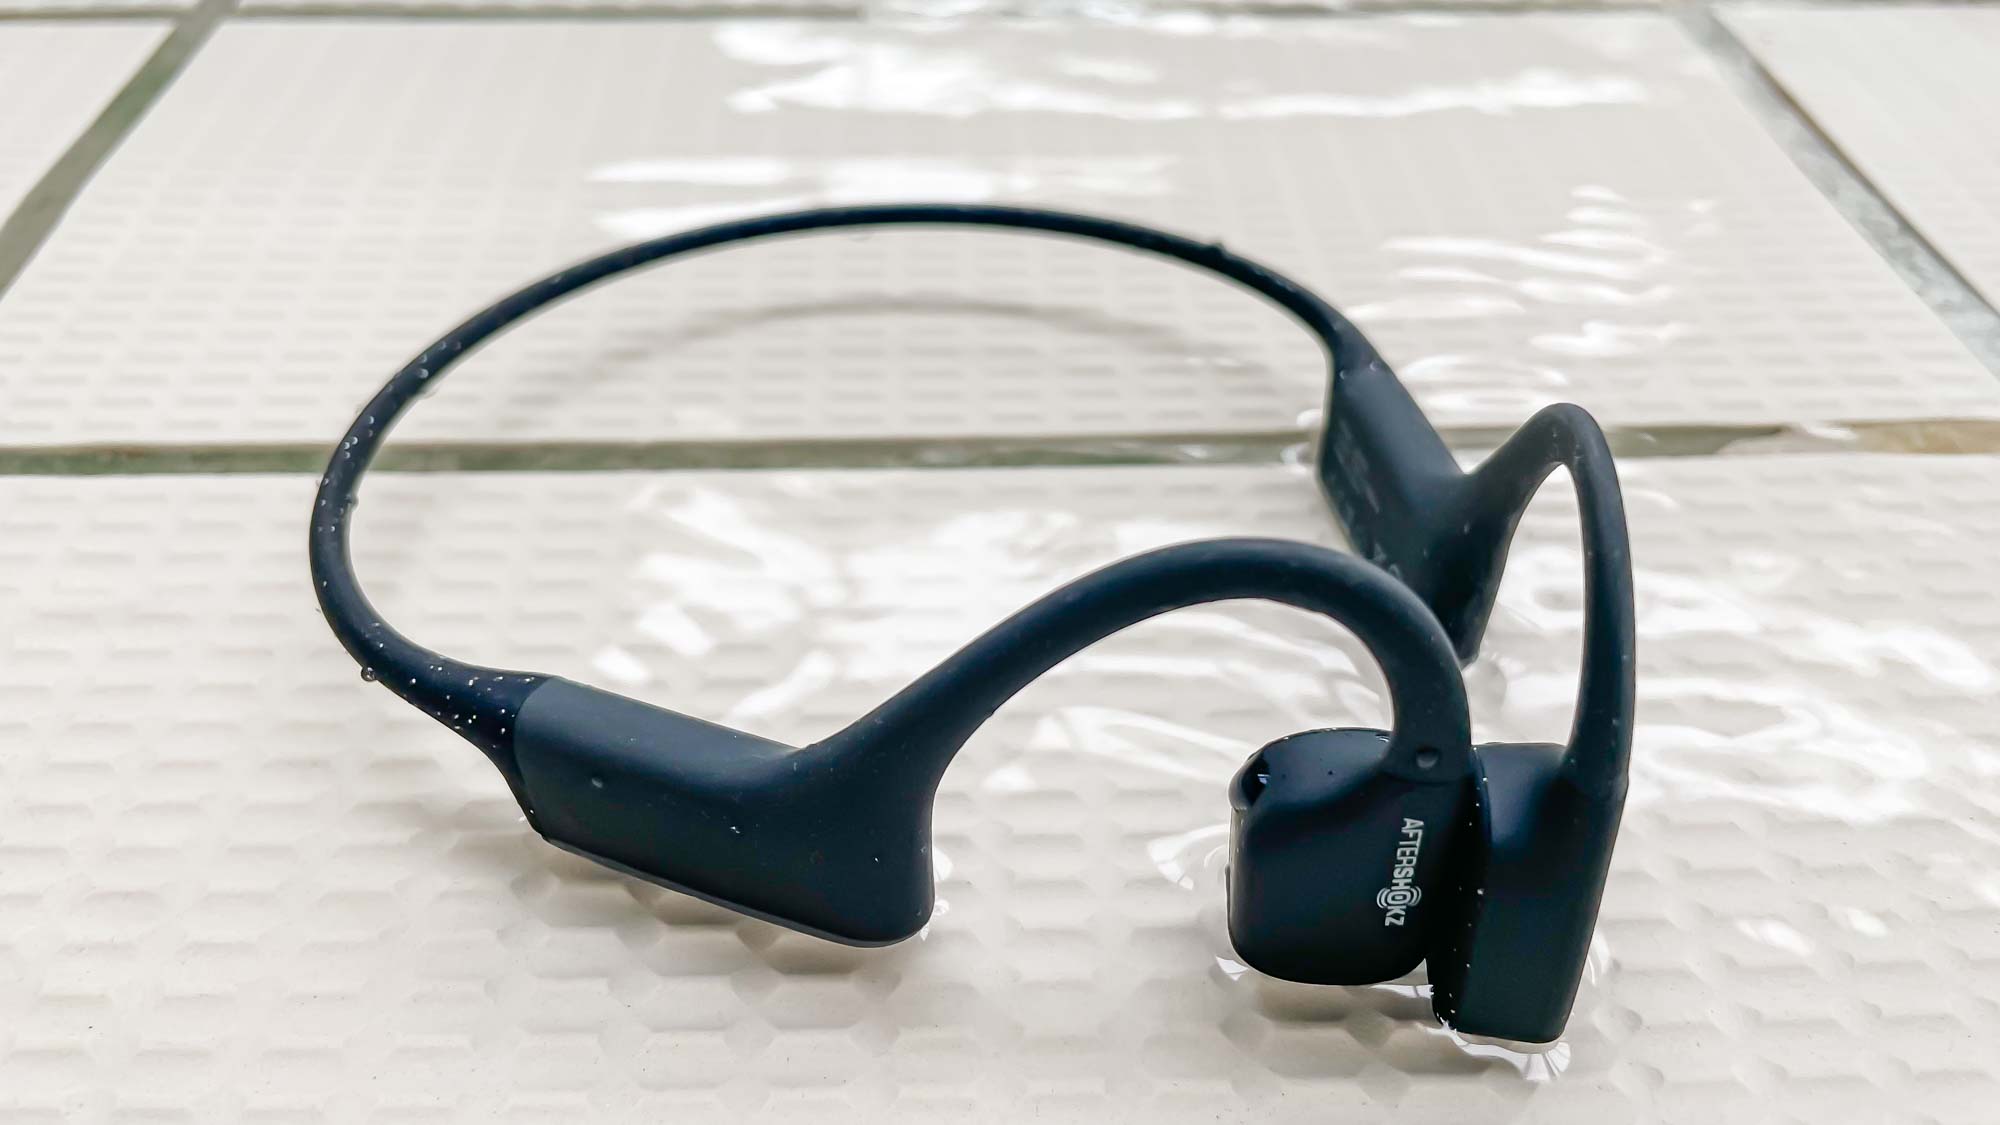 The Shokz OpenSwim headphones are a great waterproof solution with a secure  fit